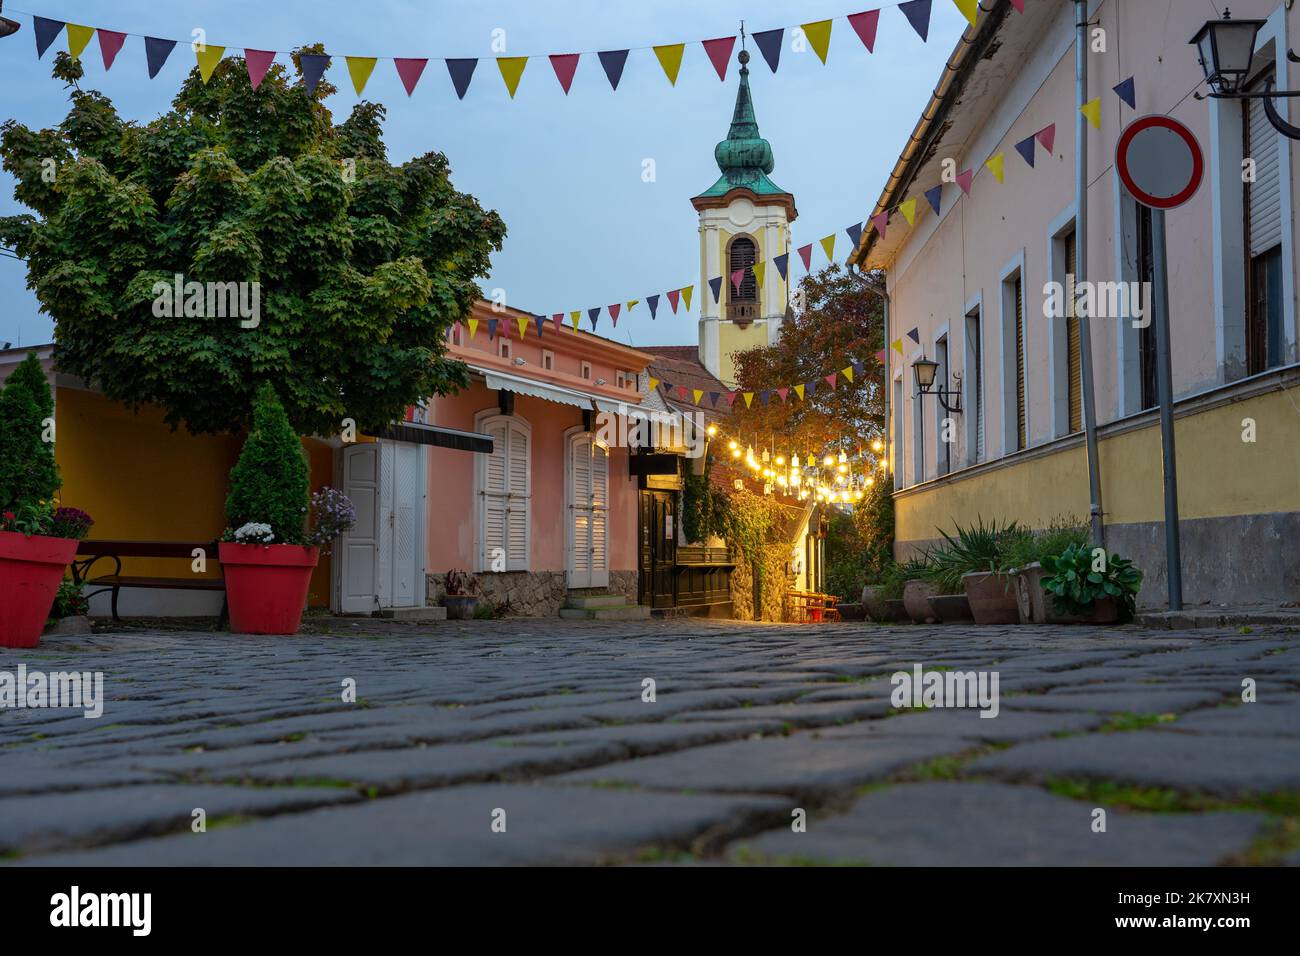 City square with beautiful city lights in Szentendre Hungary next to Budapest with colorful banner light decorations Stock Photo